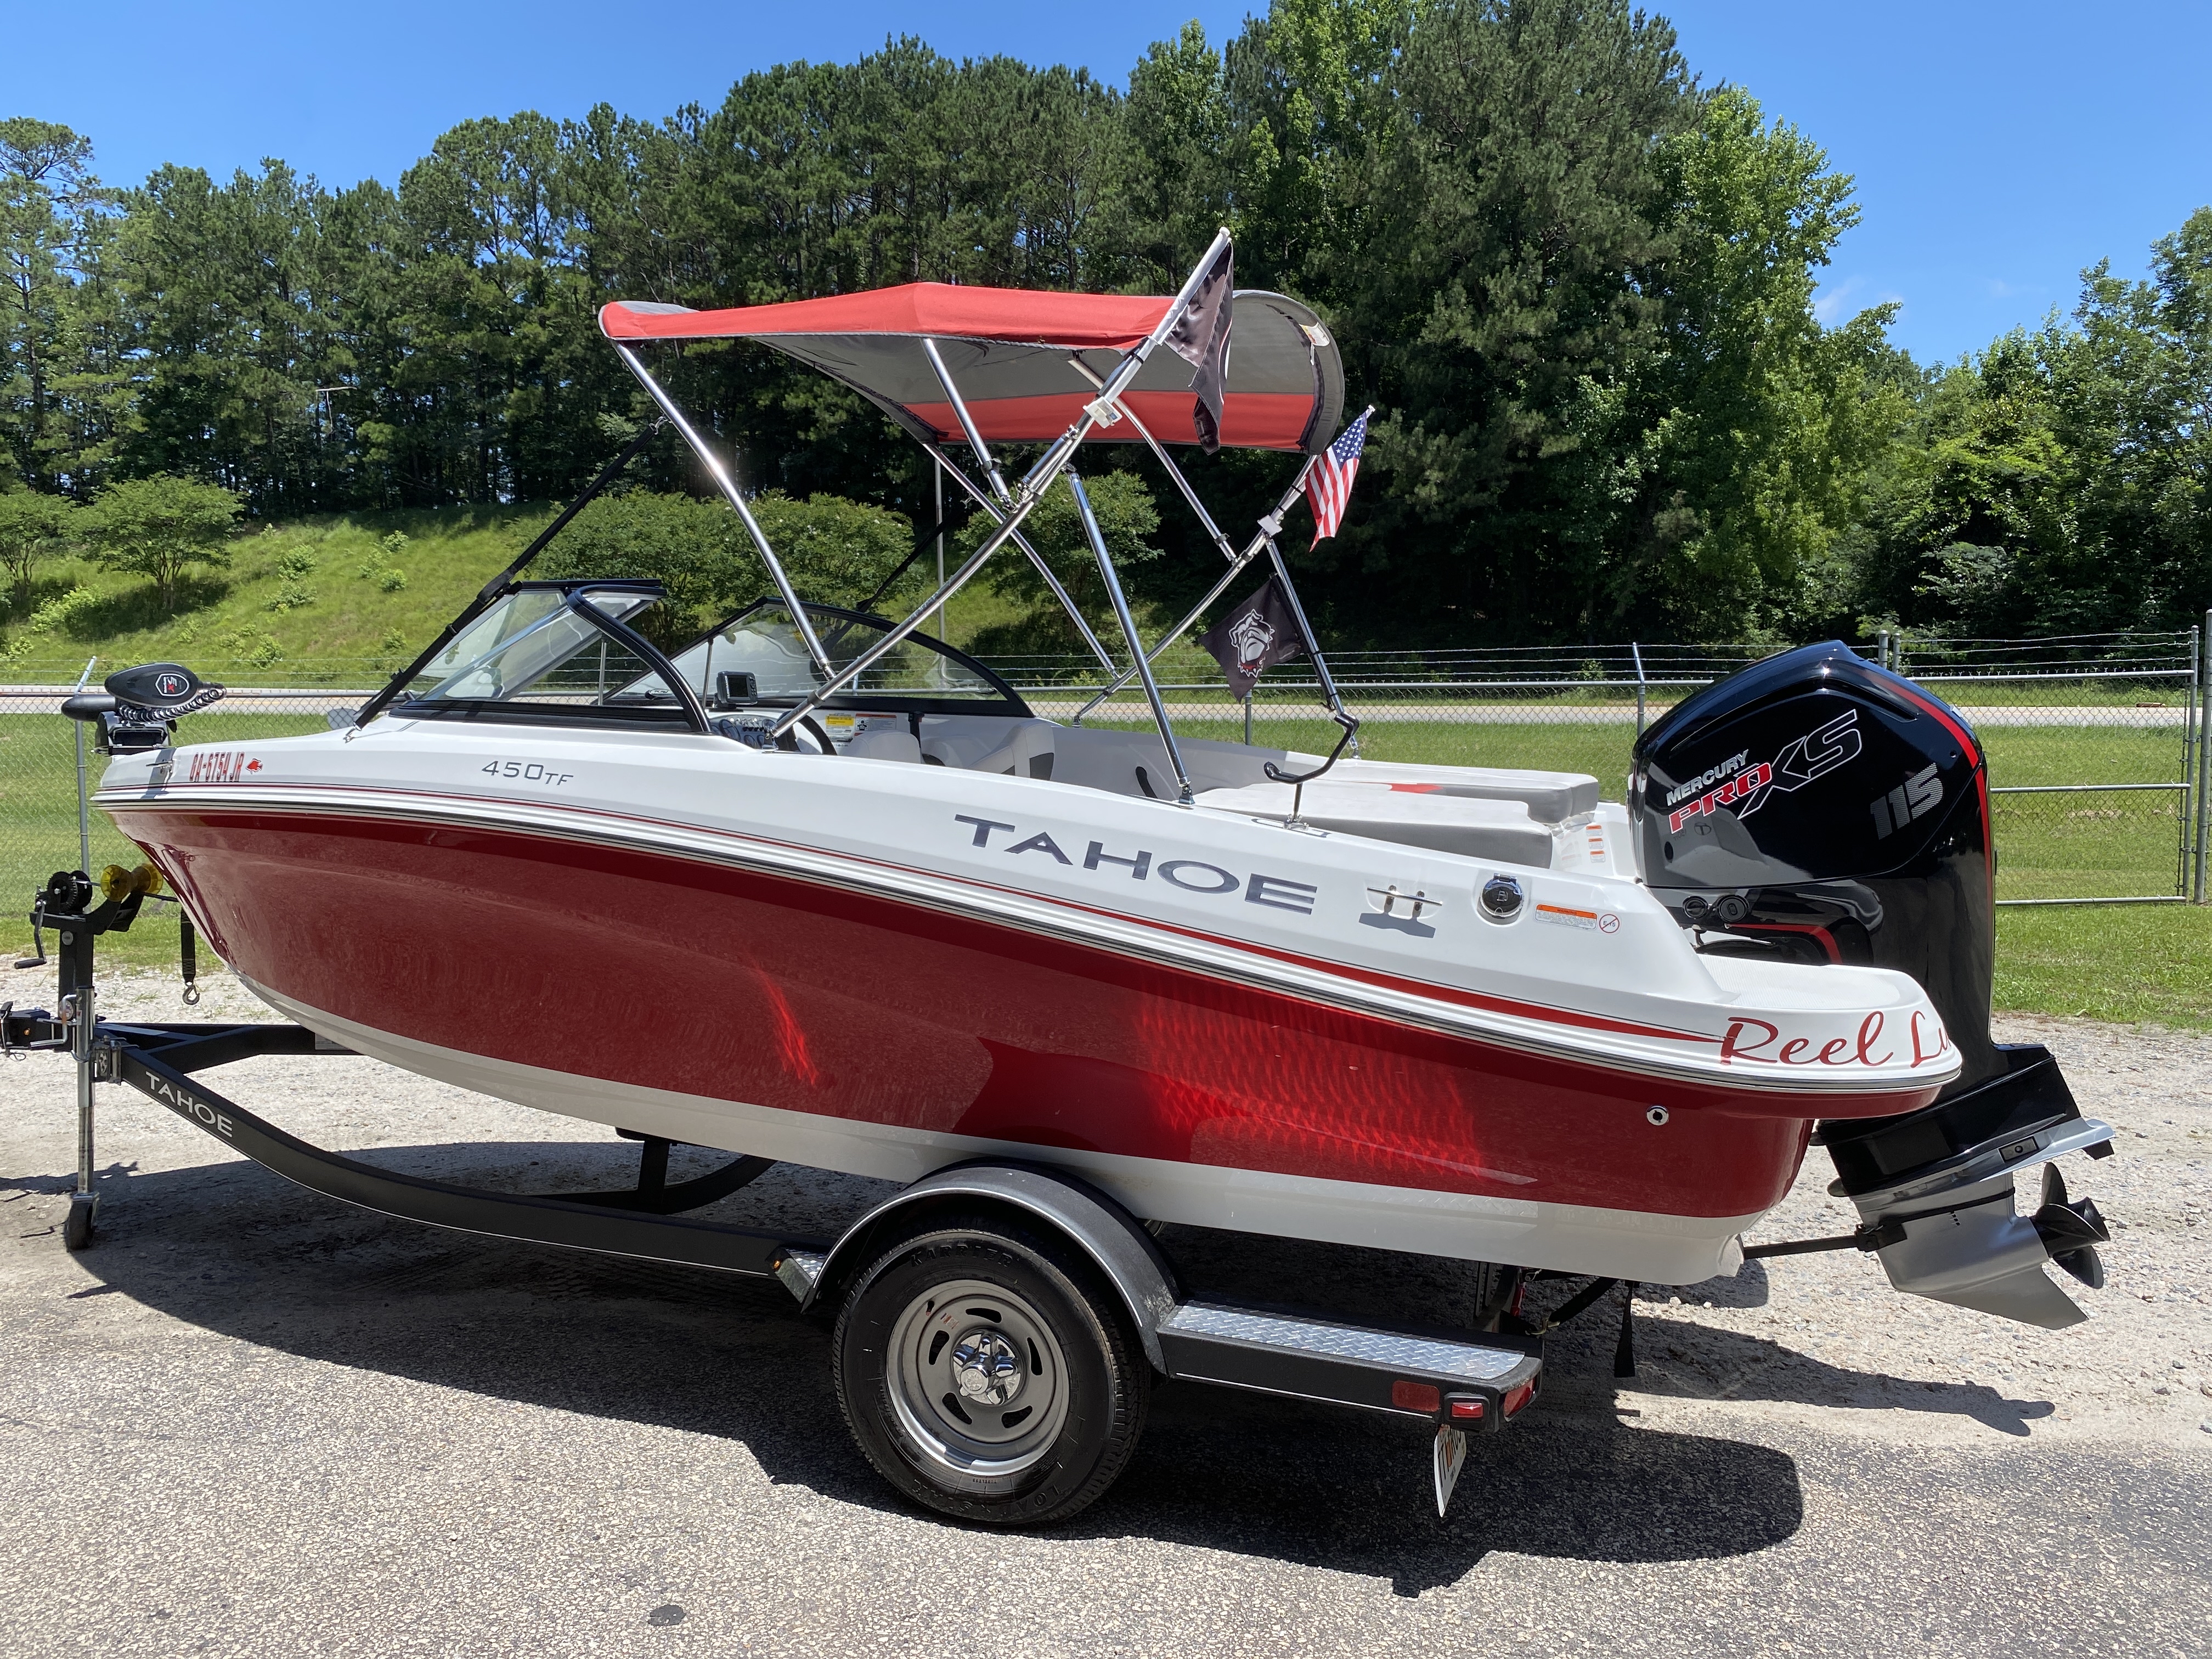 2019 Tahoe boat for sale, model of the boat is 450 TF & Image # 10 of 23